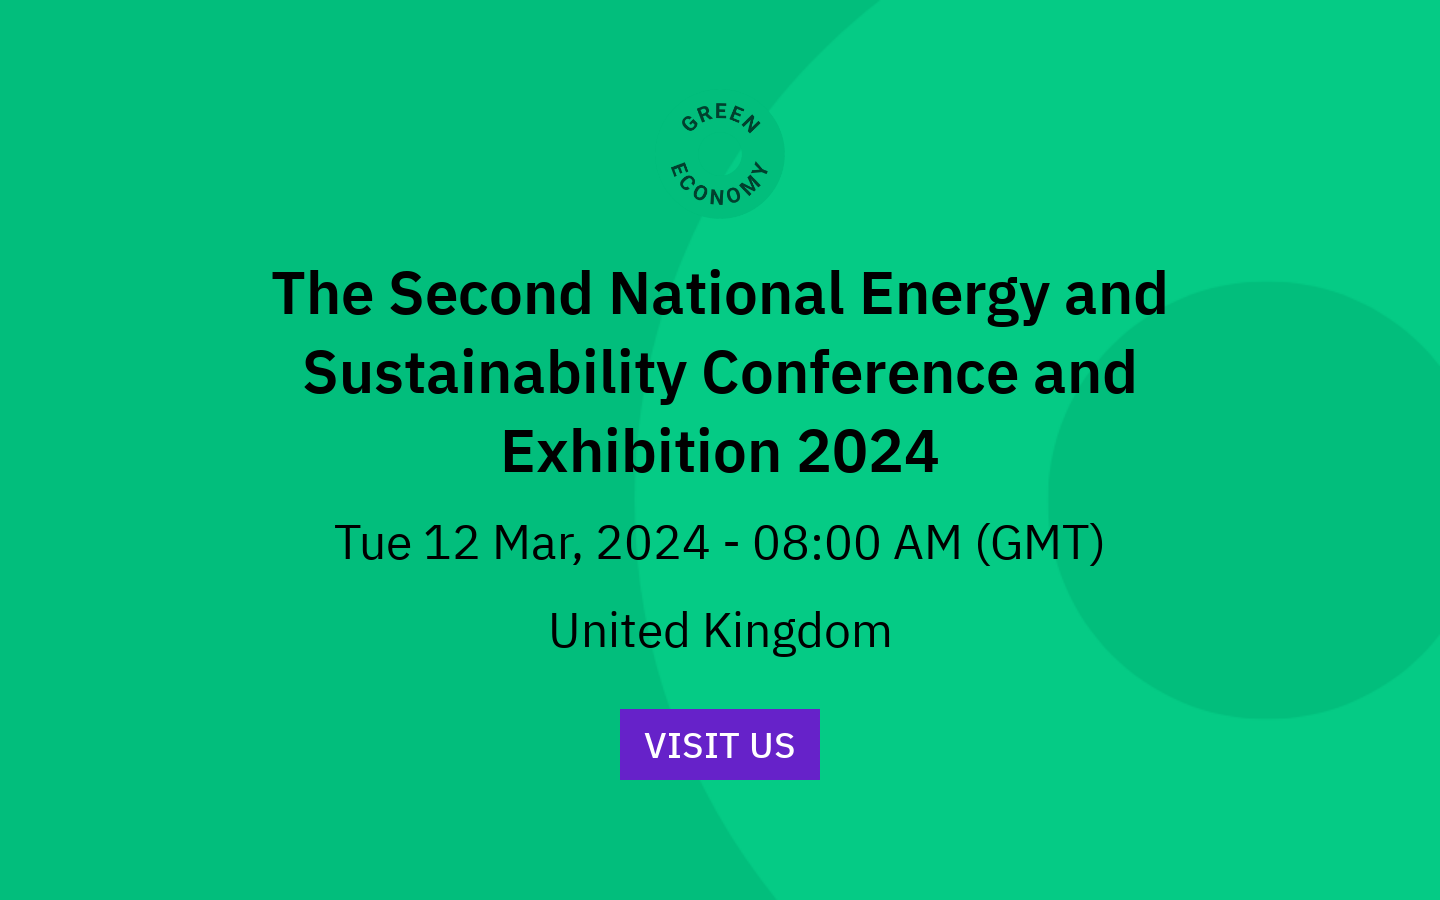 The Second National Energy and Sustainability Conference and Exhibition